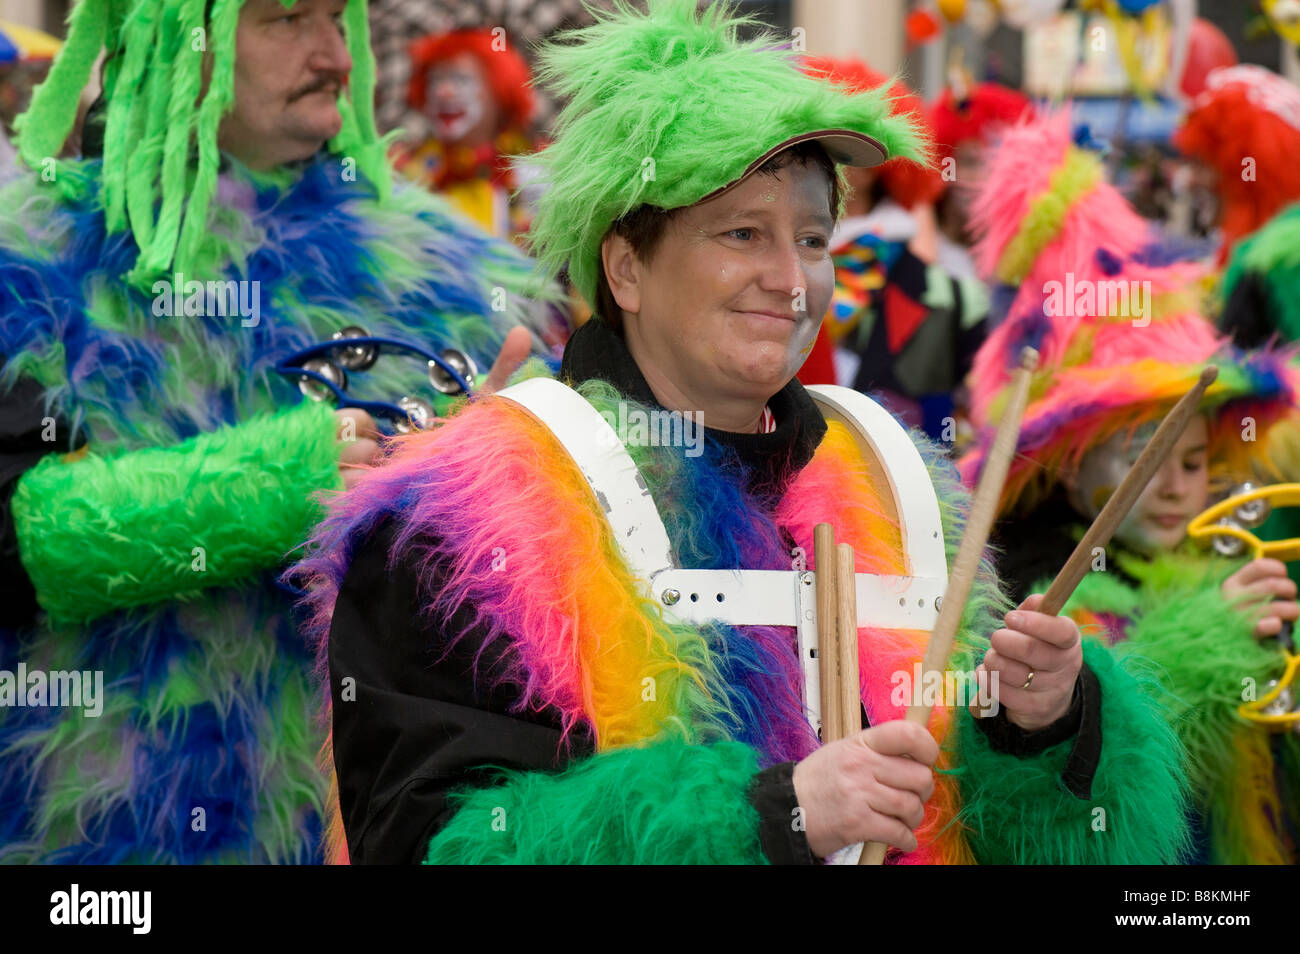 Colourful street carnival in Germany. Stock Photo